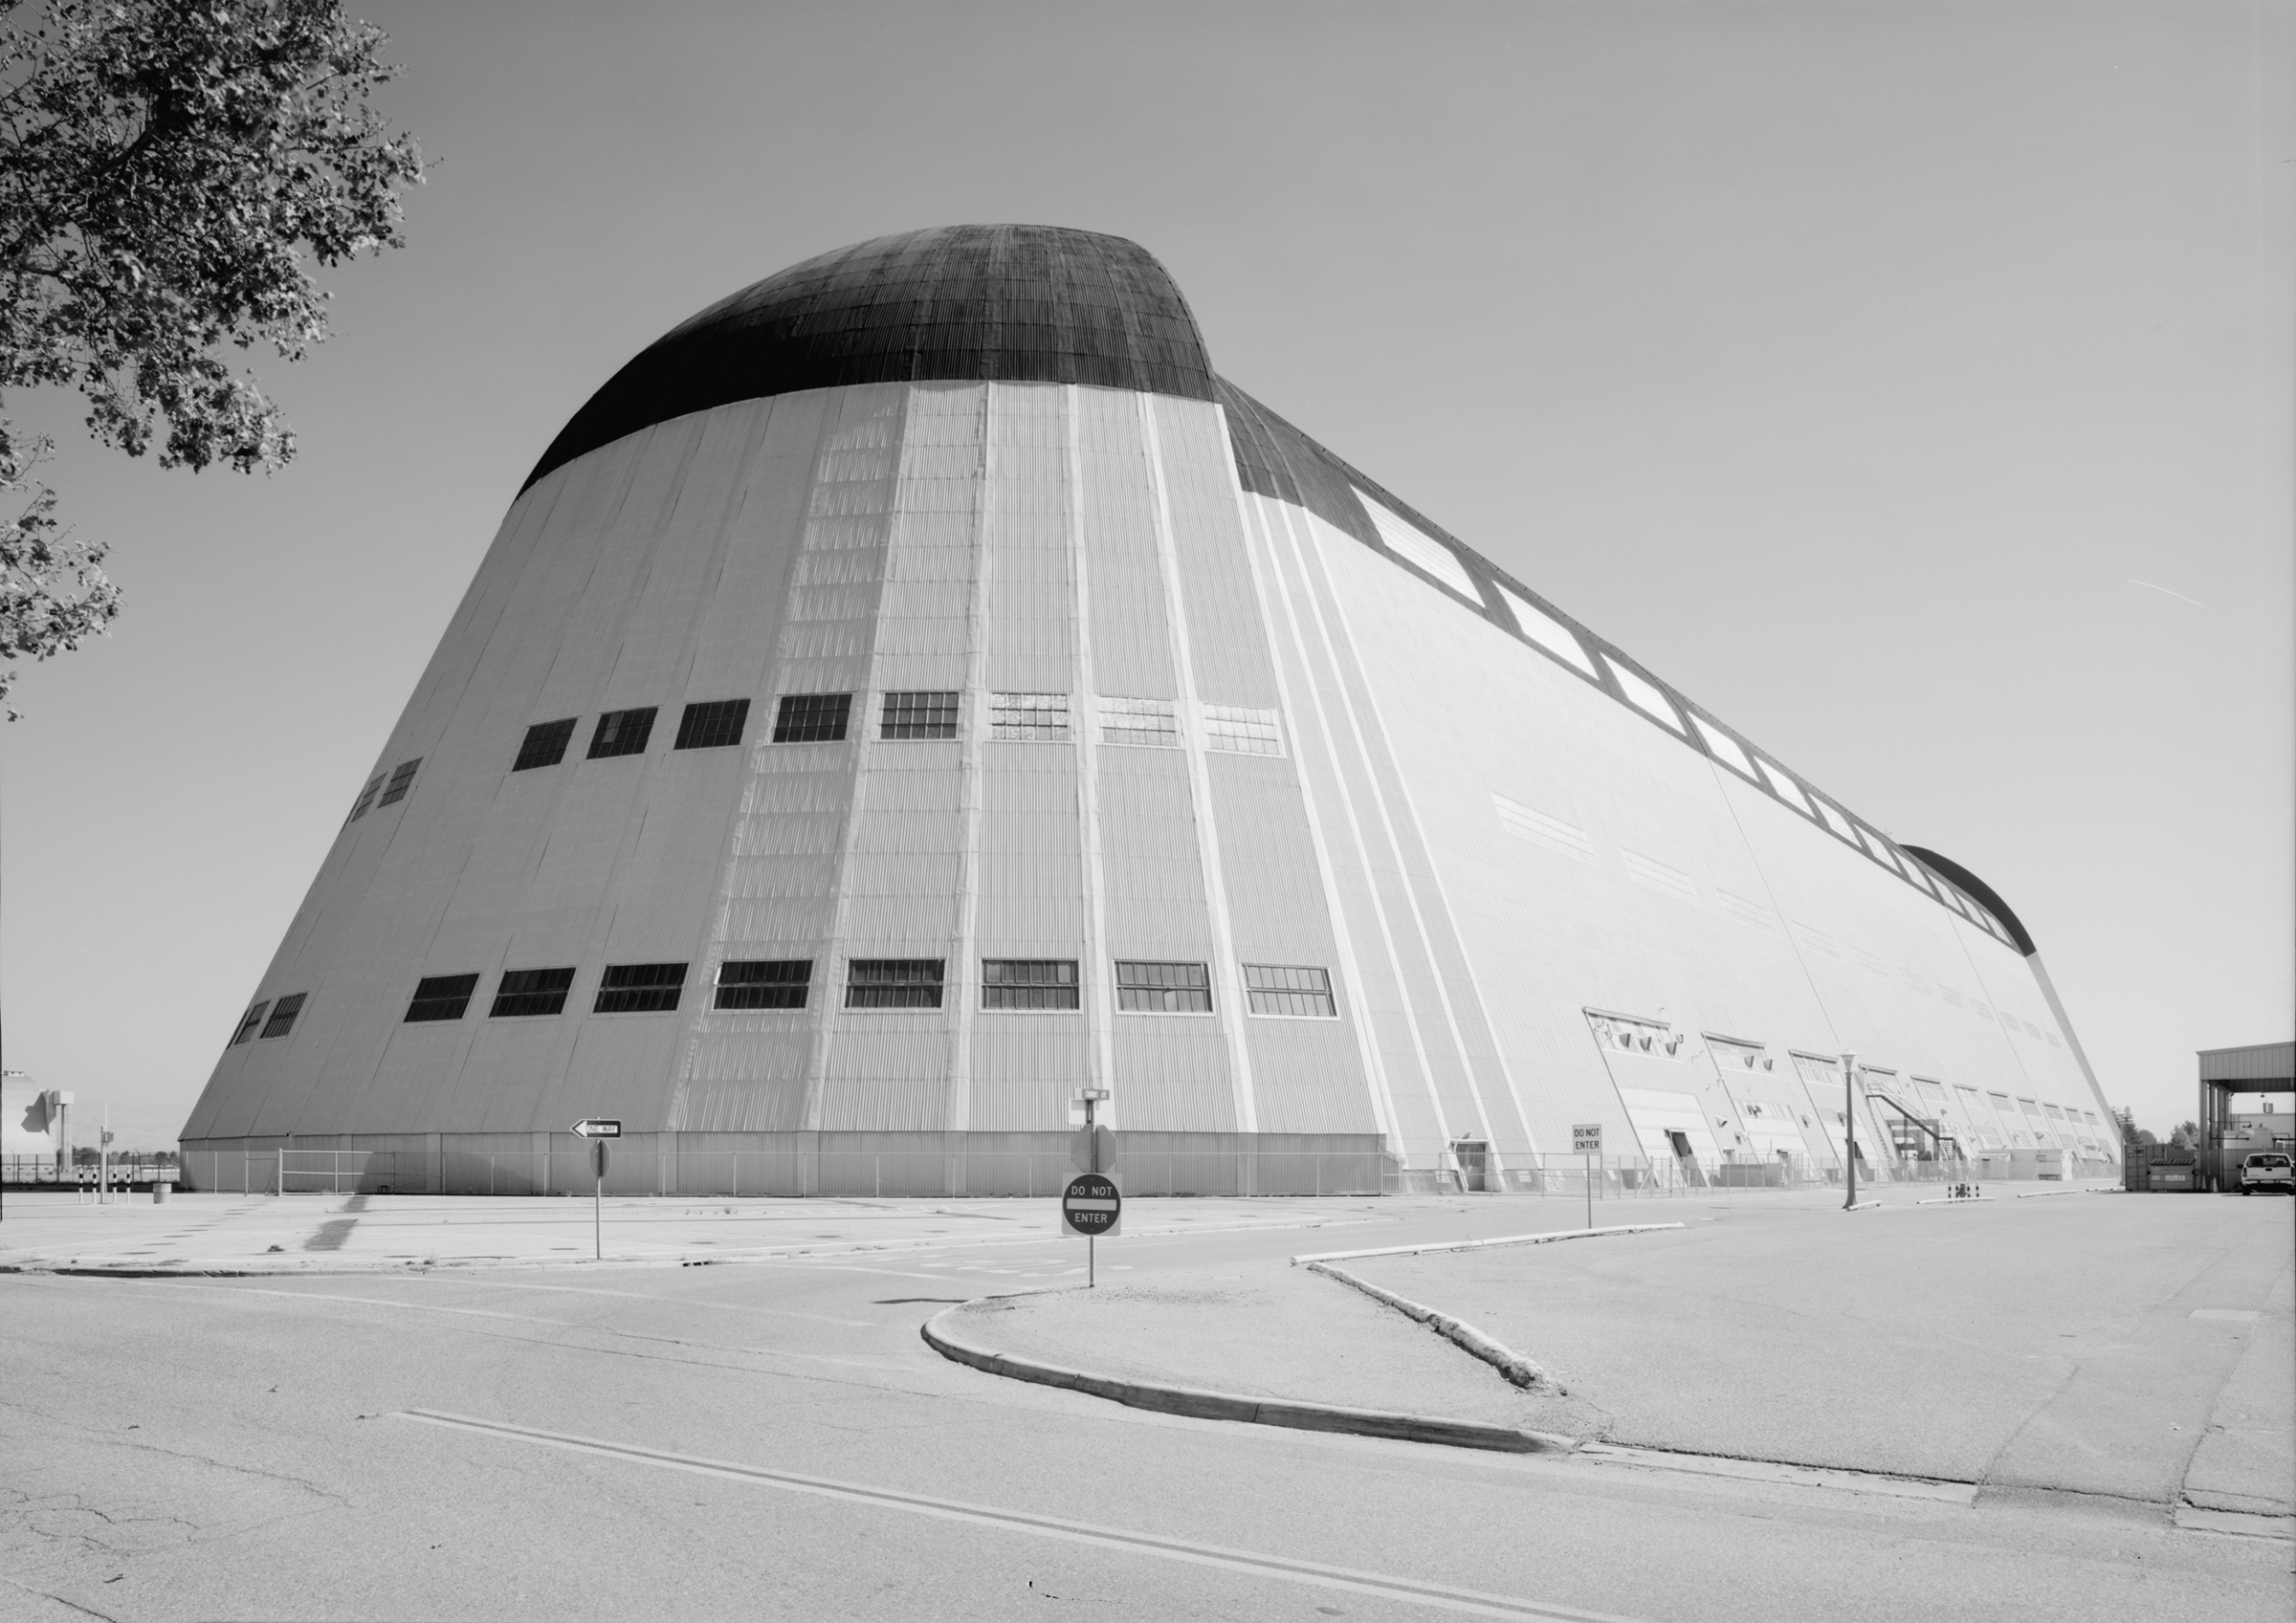 An exterior view of Hangar 1 showing its long, metal facade and the tall, curved doors located at the end of the huge white building.